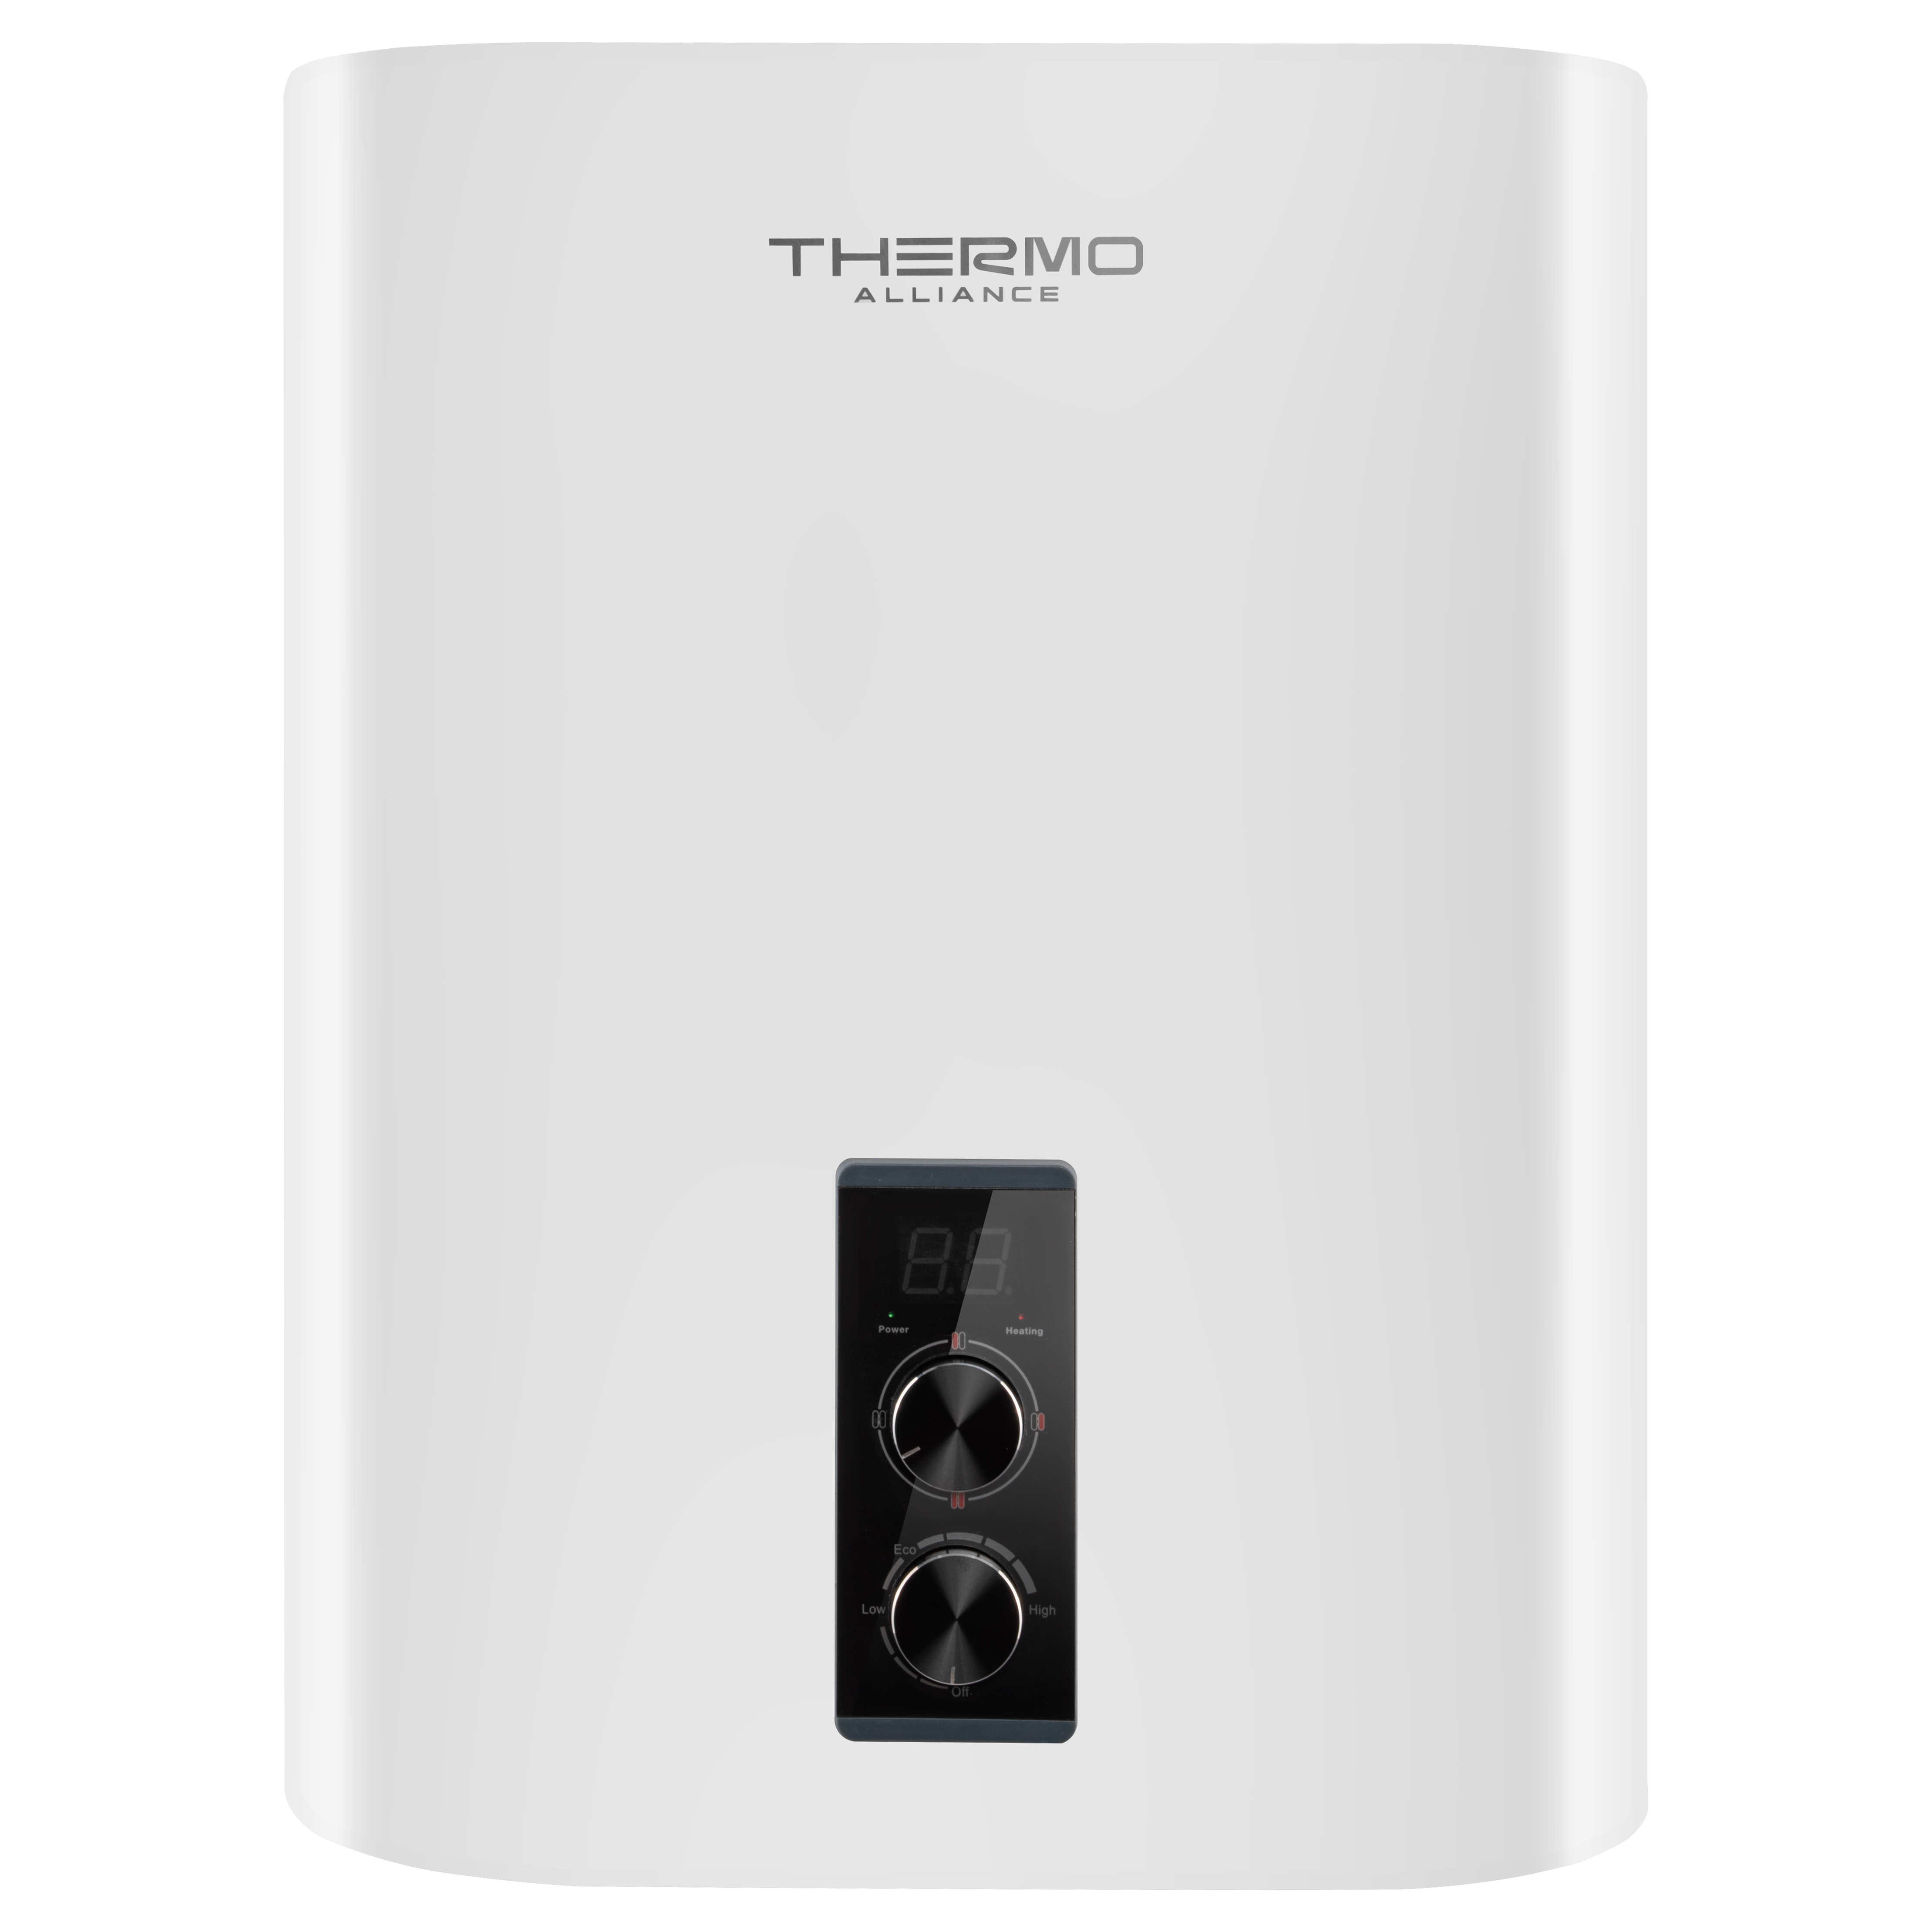 Бойлер плоский на 30 л Thermo Alliance DT30V20G(PD)/2